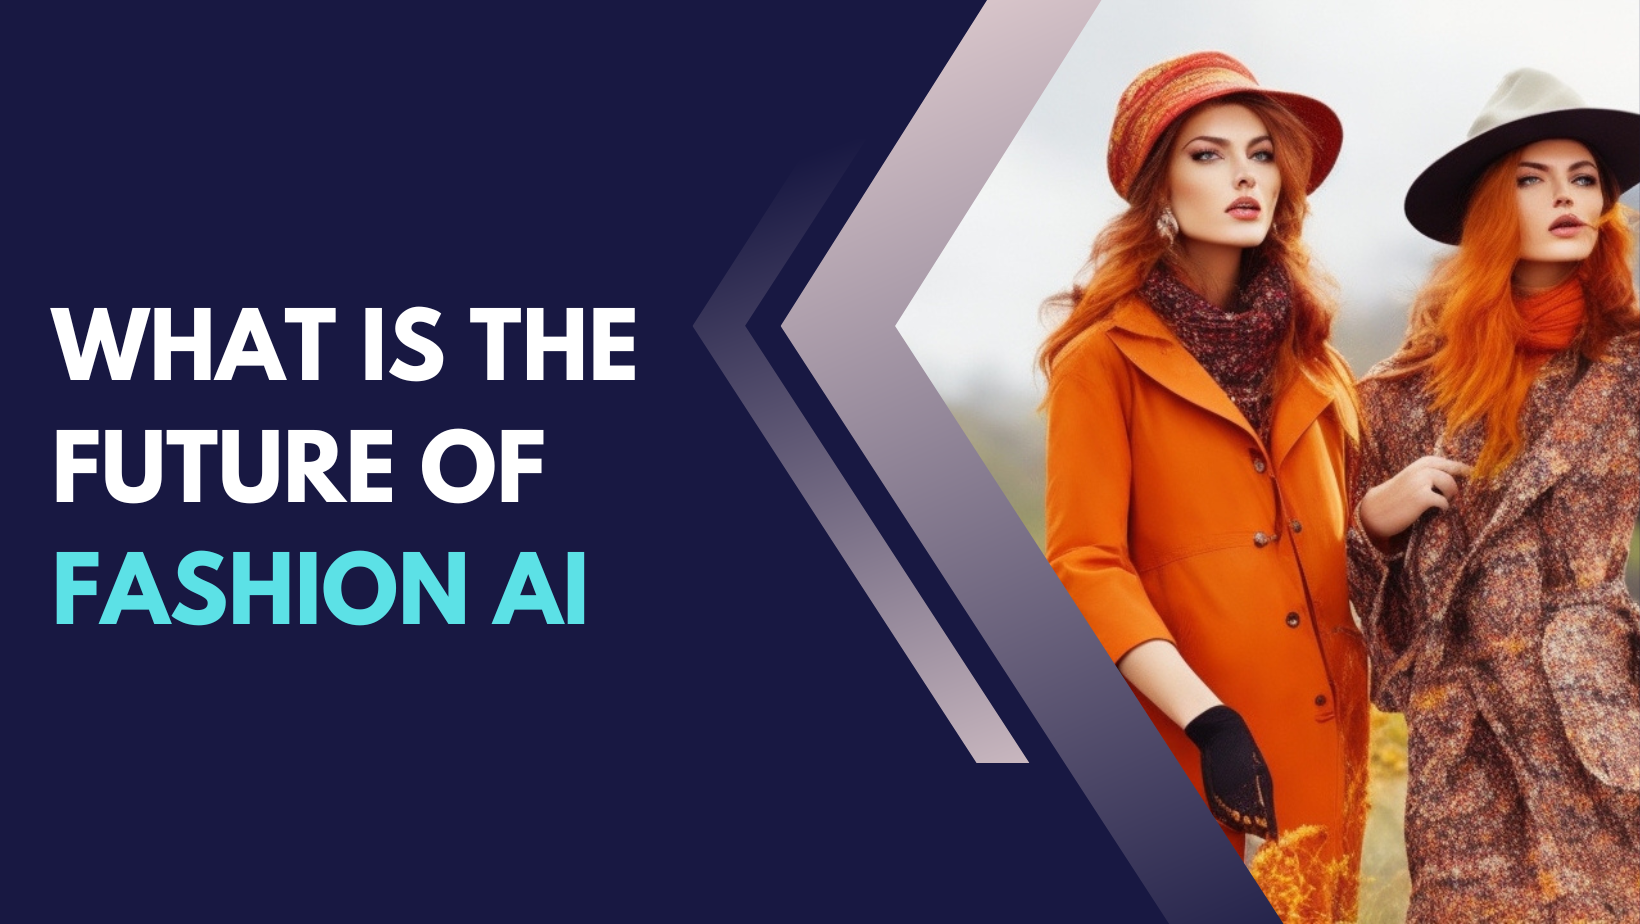 What is the future of fashion AI?